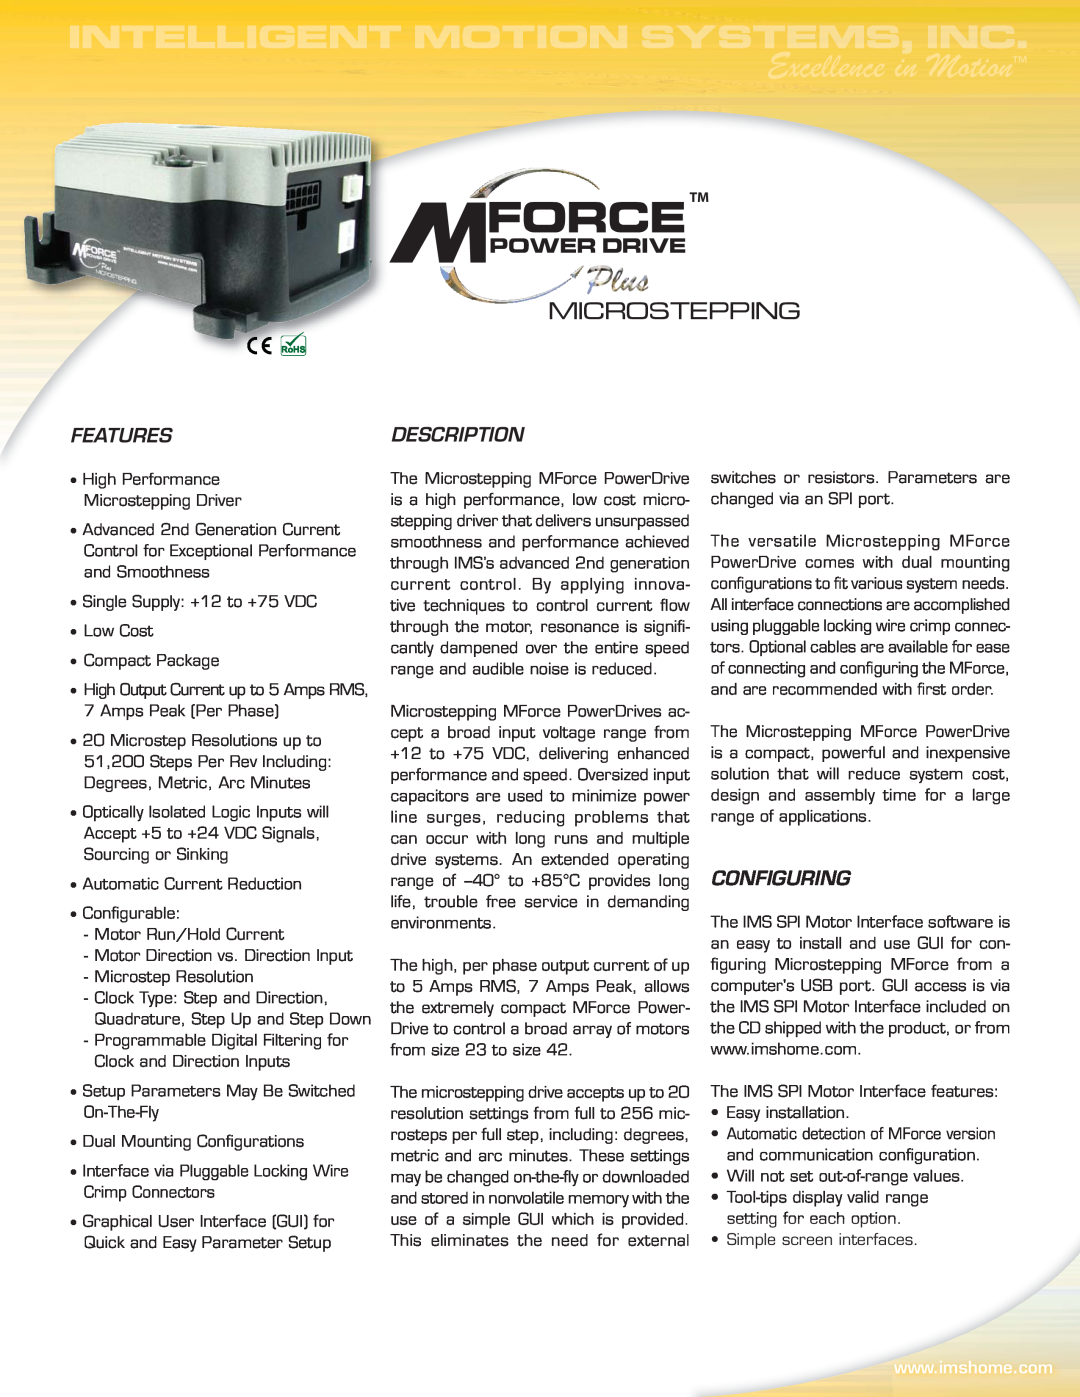 Intelligent Motion Systems Excellence in Motion manual Microstepping, Features, Description, Configuring, Forcetm 